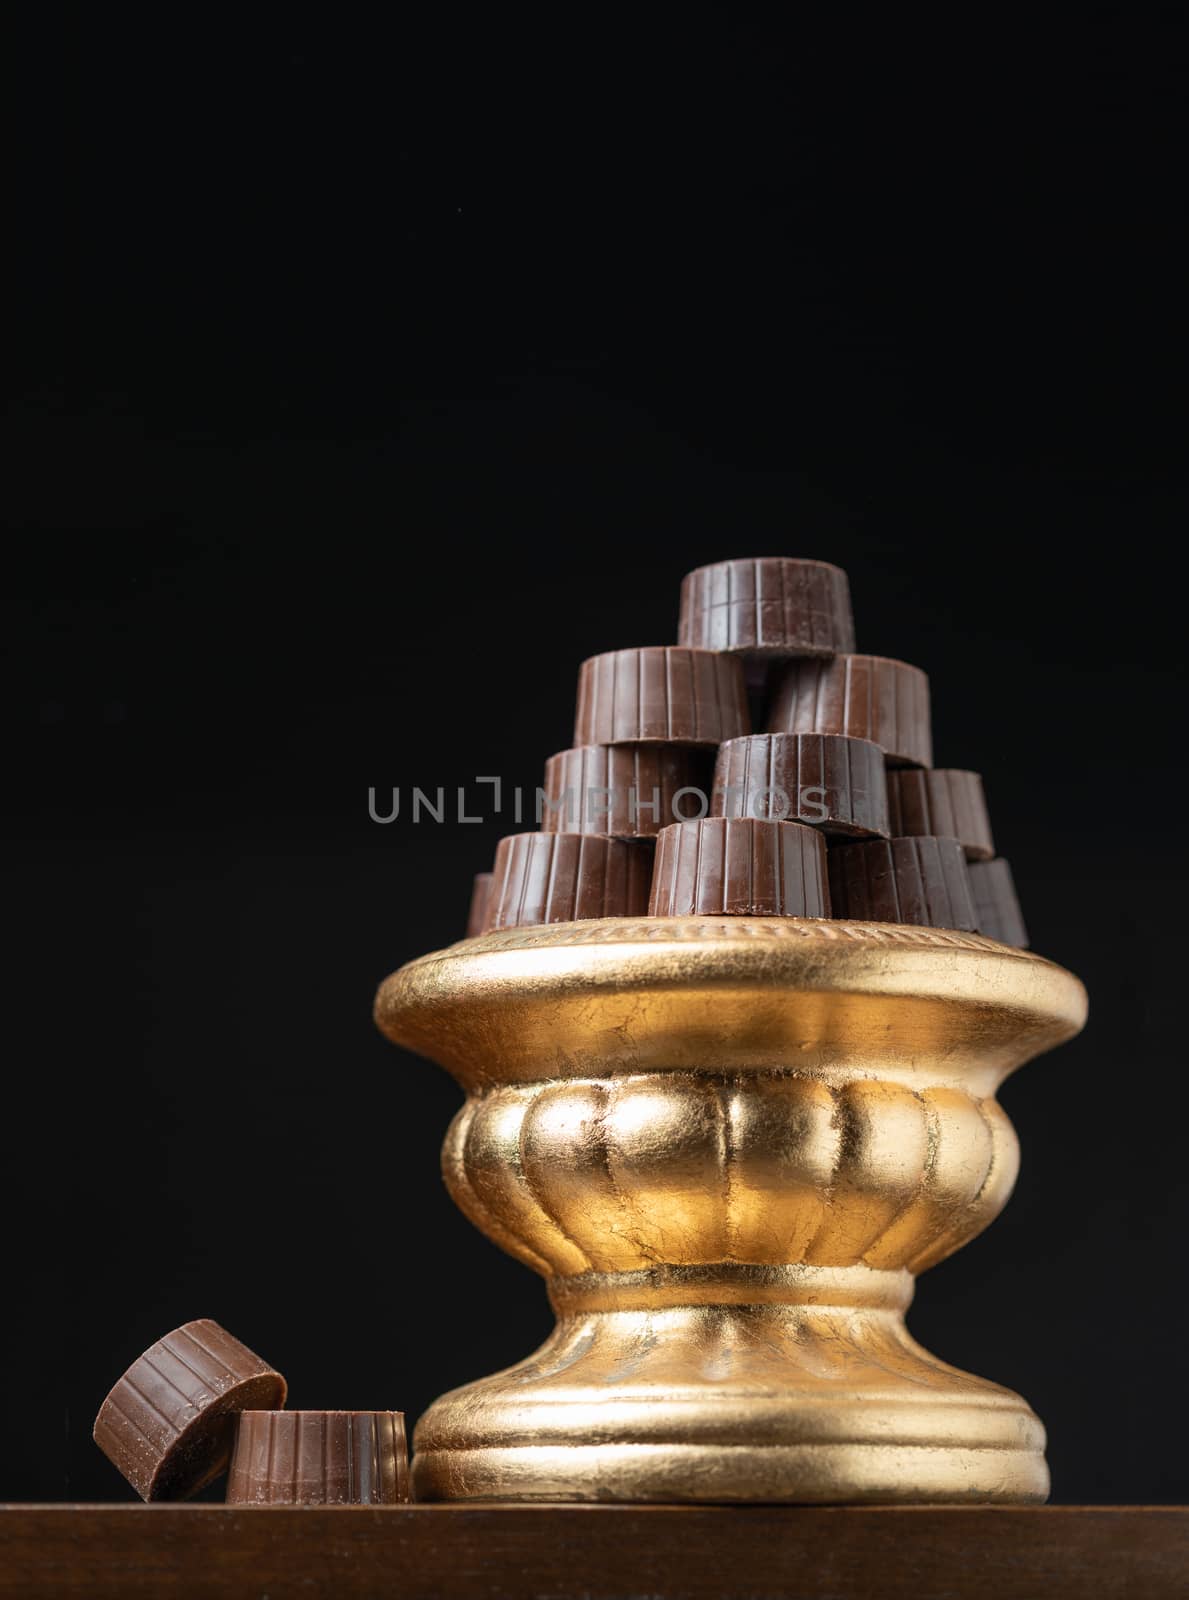 Stack of Fine Chocolates On Golden Pillar Dish With Dark Backgro by Feverpitched